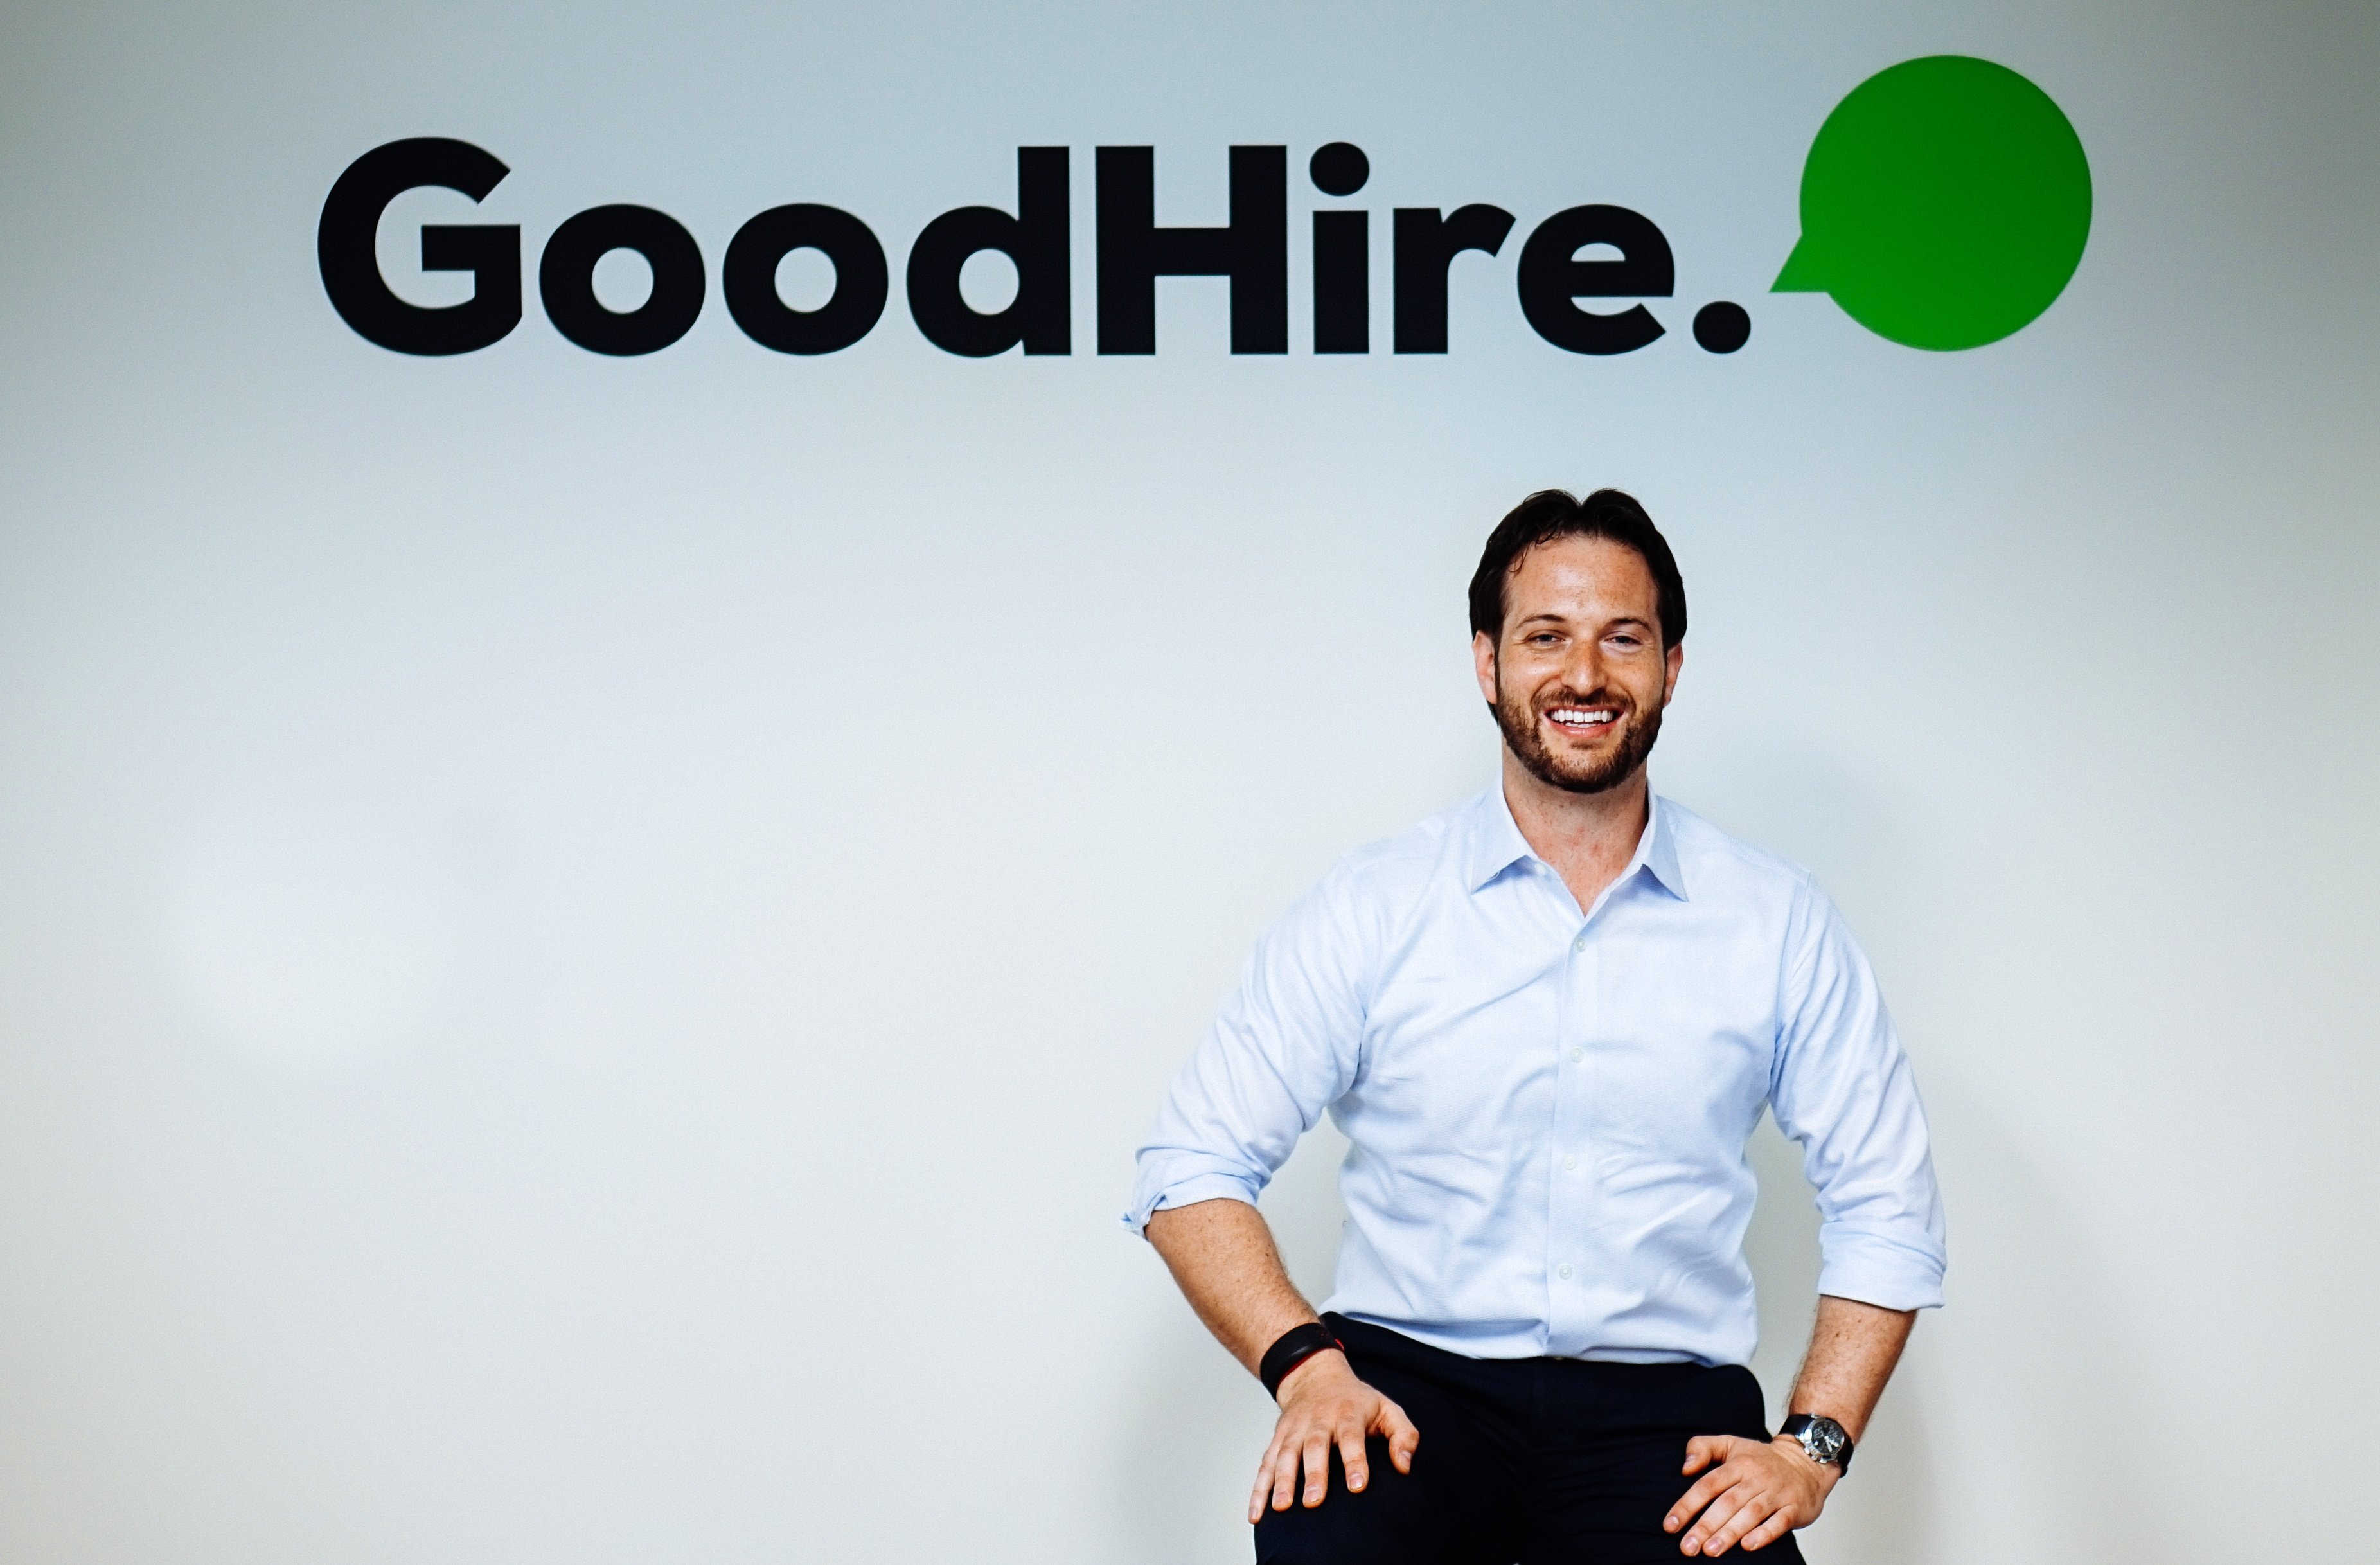 Max Wesman, VP of Product at GoodHire